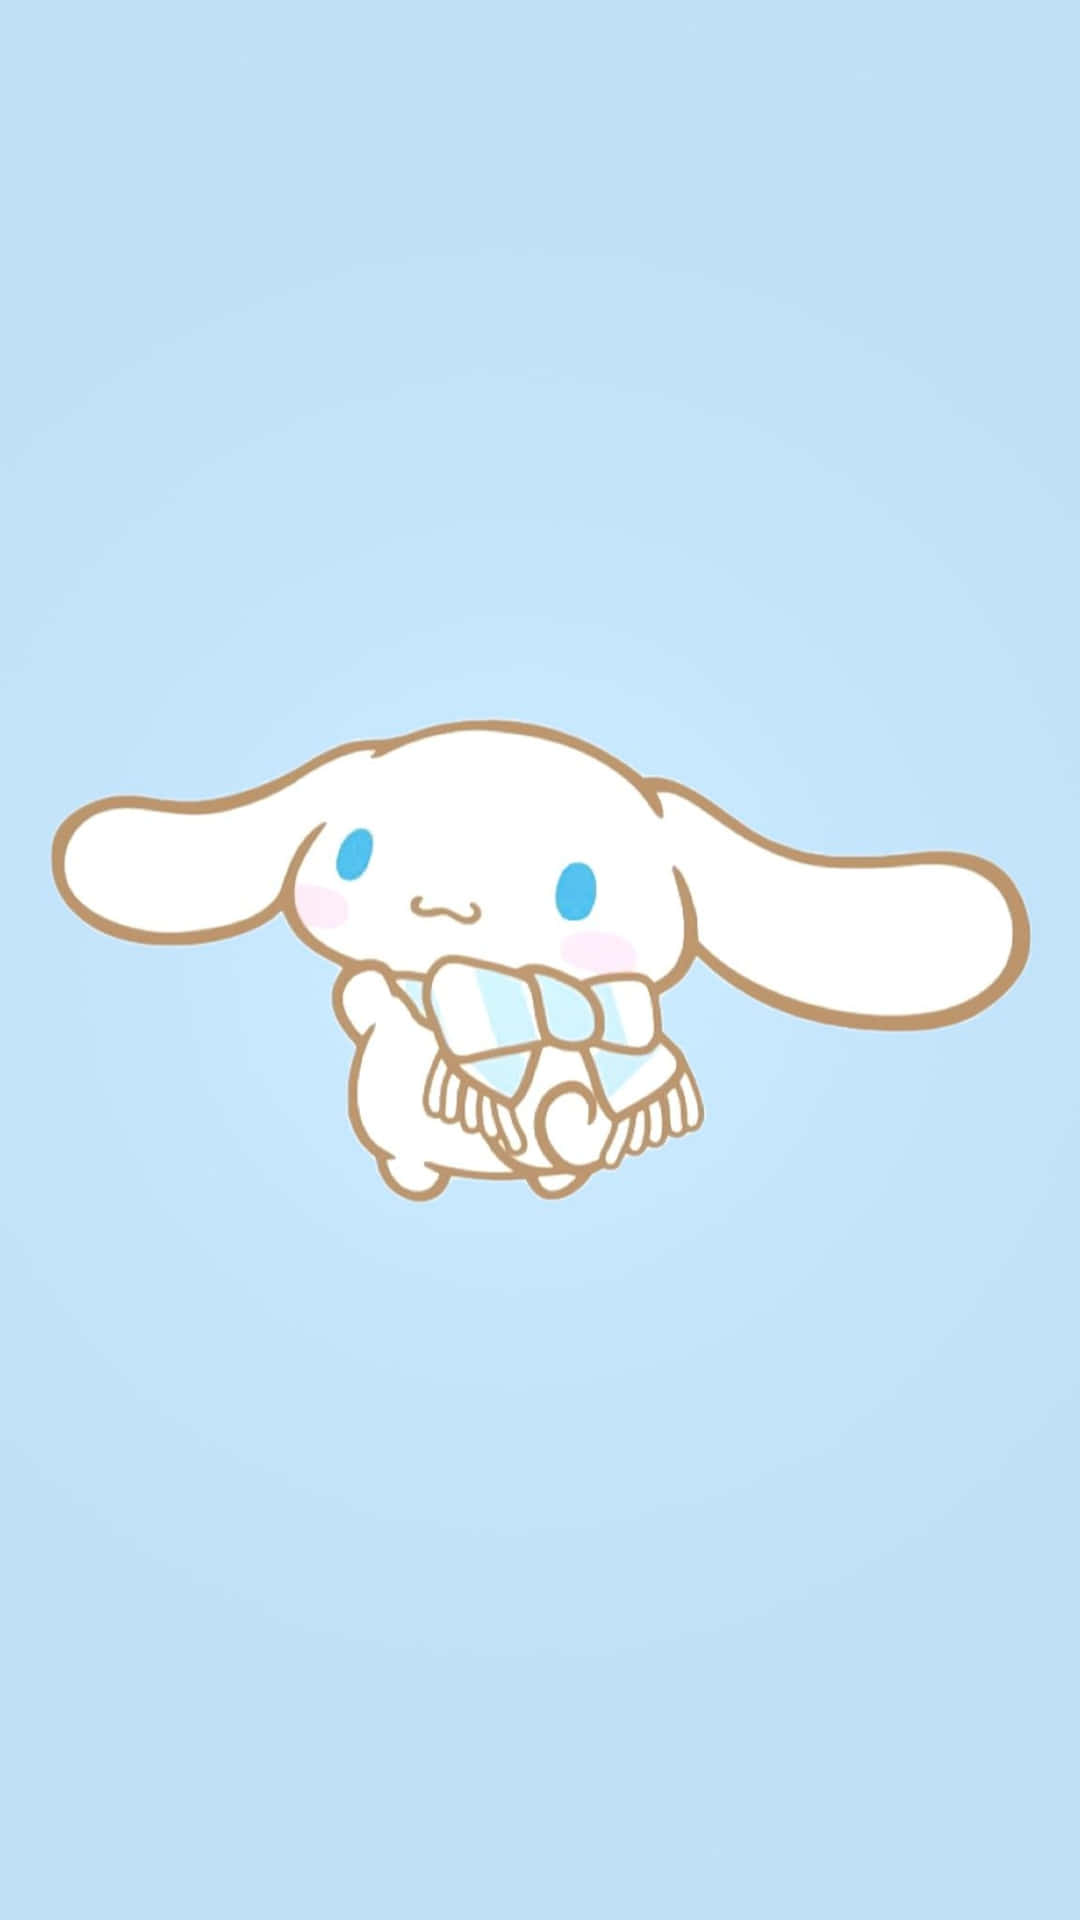 Take a break from your daily routine and relax like Cinnamoroll! Wallpaper